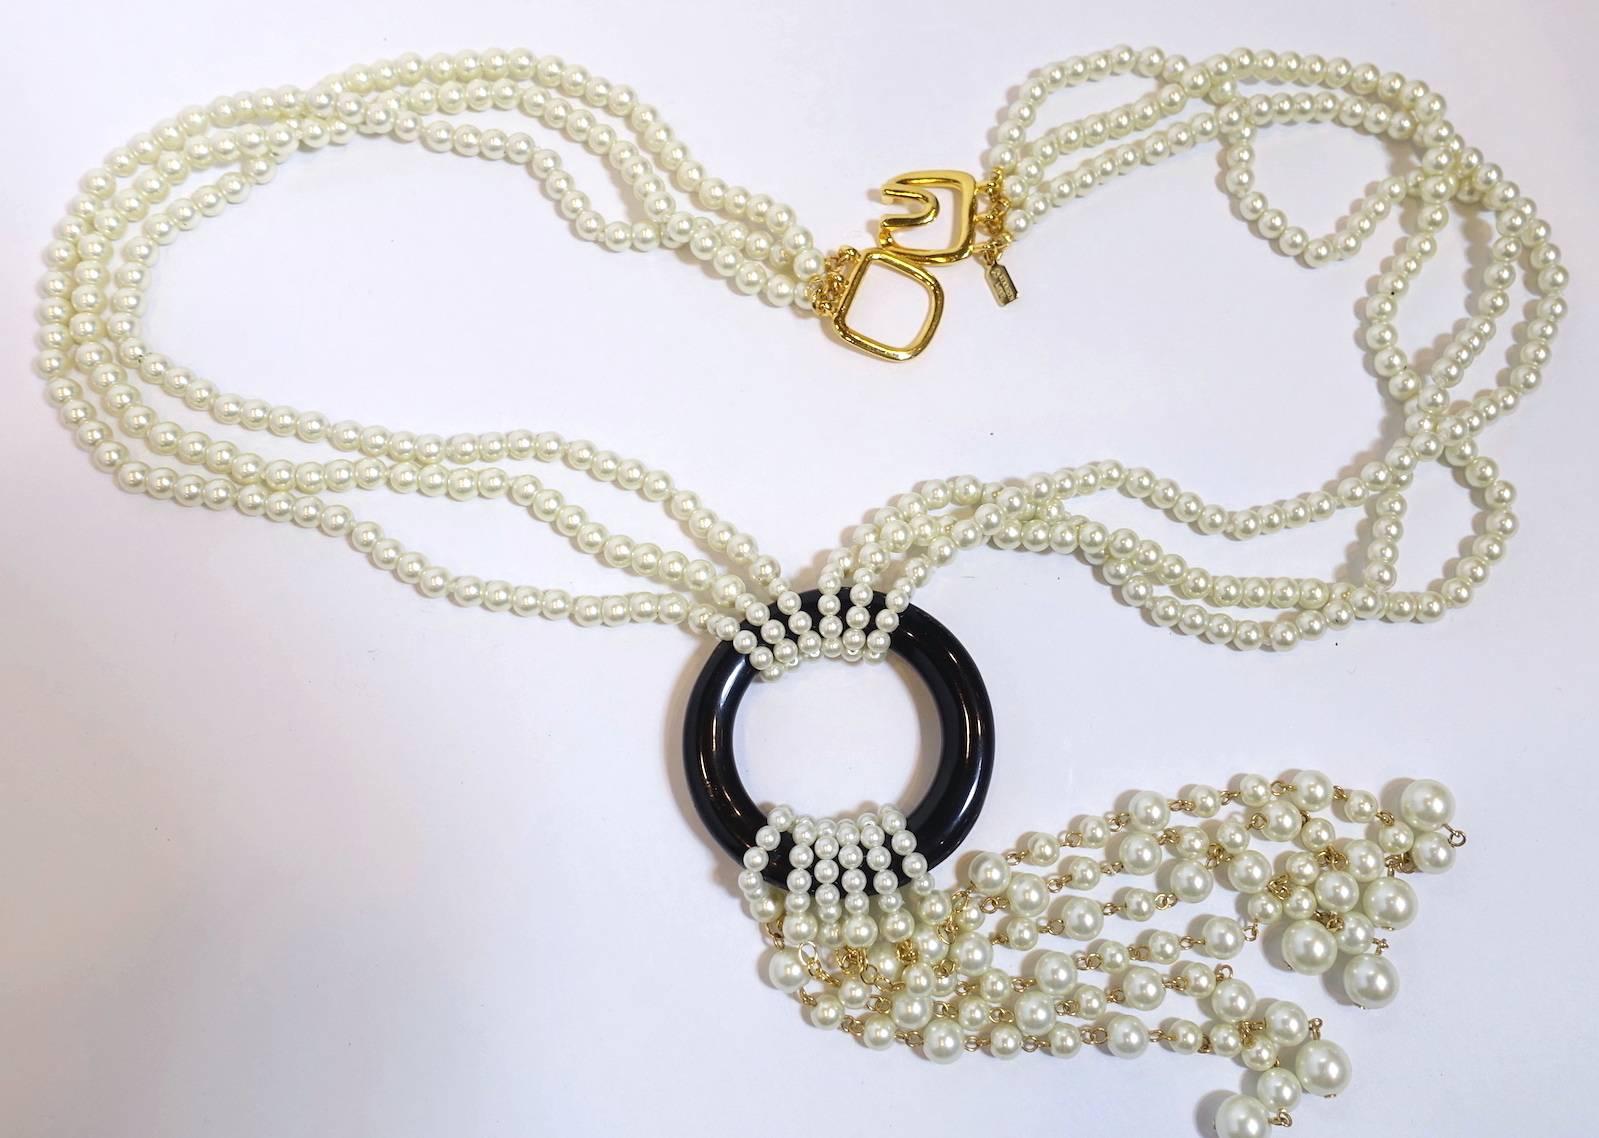 This signed Kenneth Lane necklace features faux pearls encircling a black enameled hoop in a nickel-free gold-plated base metal setting.  This necklace measures 30” long with a hook closure. The pearls on the neckpiece are 1/4” wide.  The center